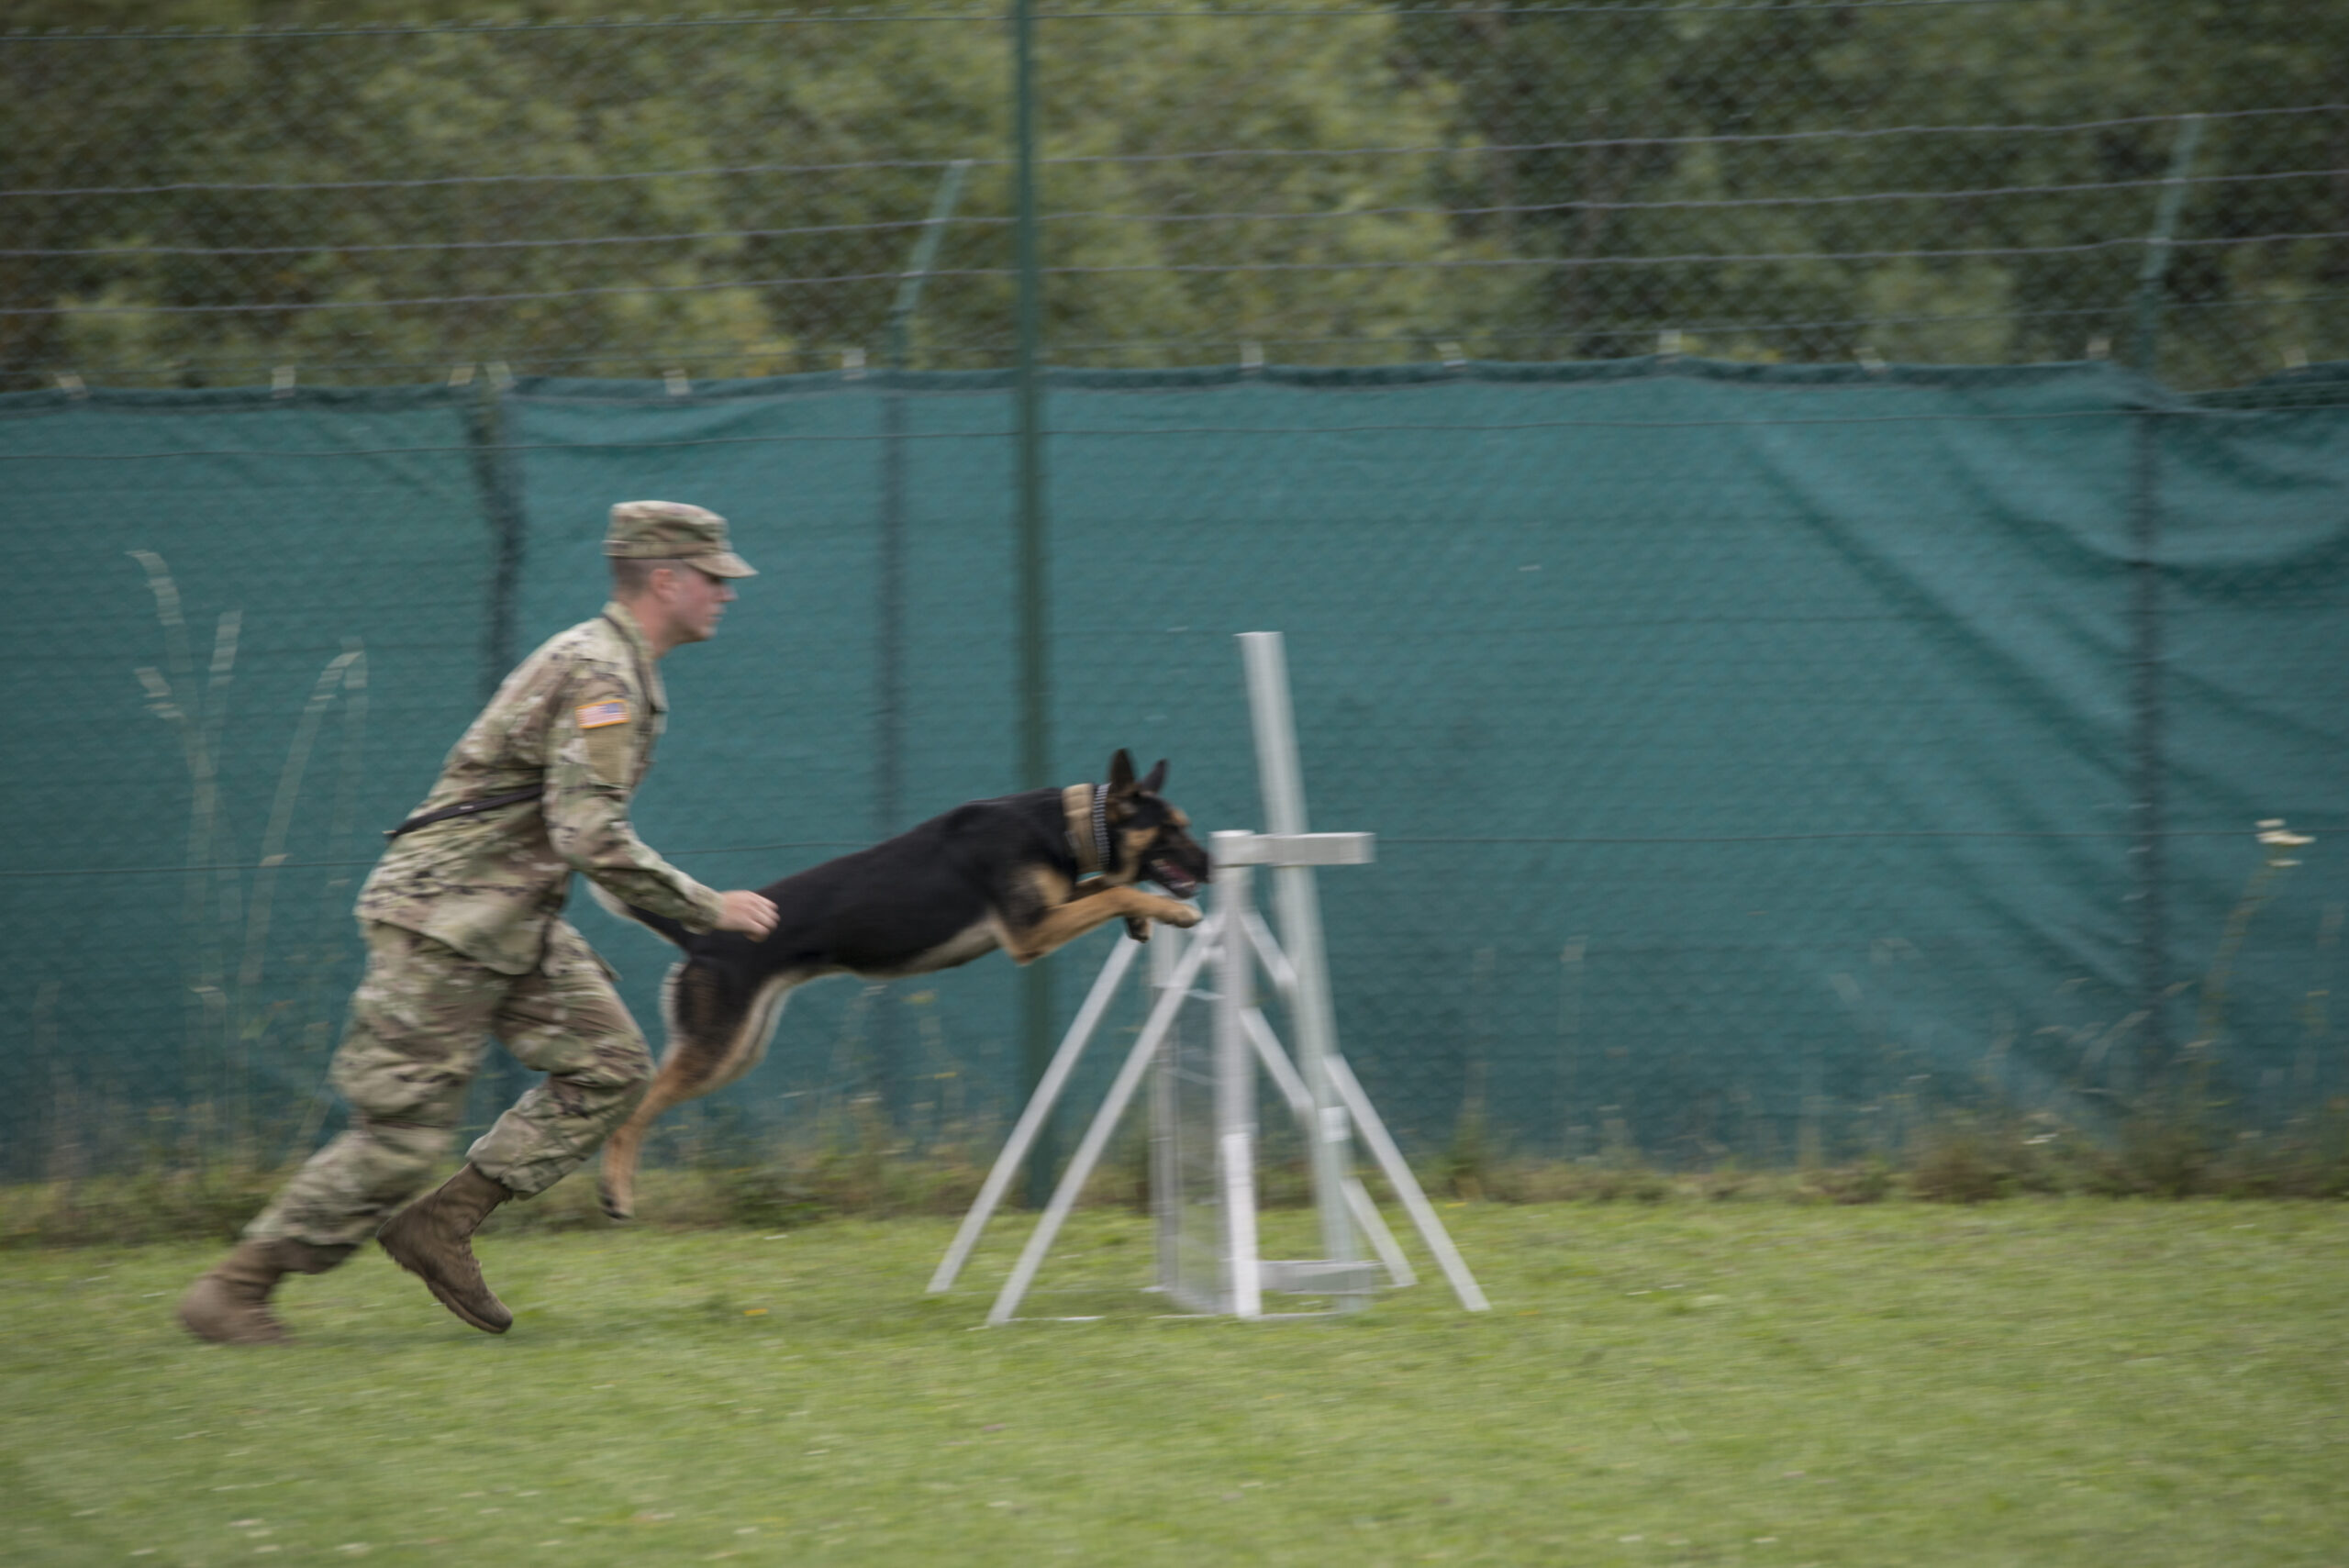 U.S. Army Pfc. Michael S. Martin with the 131st Military Working Dog Detachment, 615th Military Police Company, conducts dog-handler certification at Oberdachstetten Range Area at U.S. Army Garrison Ansbach in Bavaria, Germany, July 18, 2017. Military working dogs are trained to subdue or intimidate suspects before having to use lethal force; they are also used for detecting explosives, narcotics and other harmful materials. (U.S. Army photo by Visual Information Specialist Georgios Moumoulidis, TSC Ansbach)